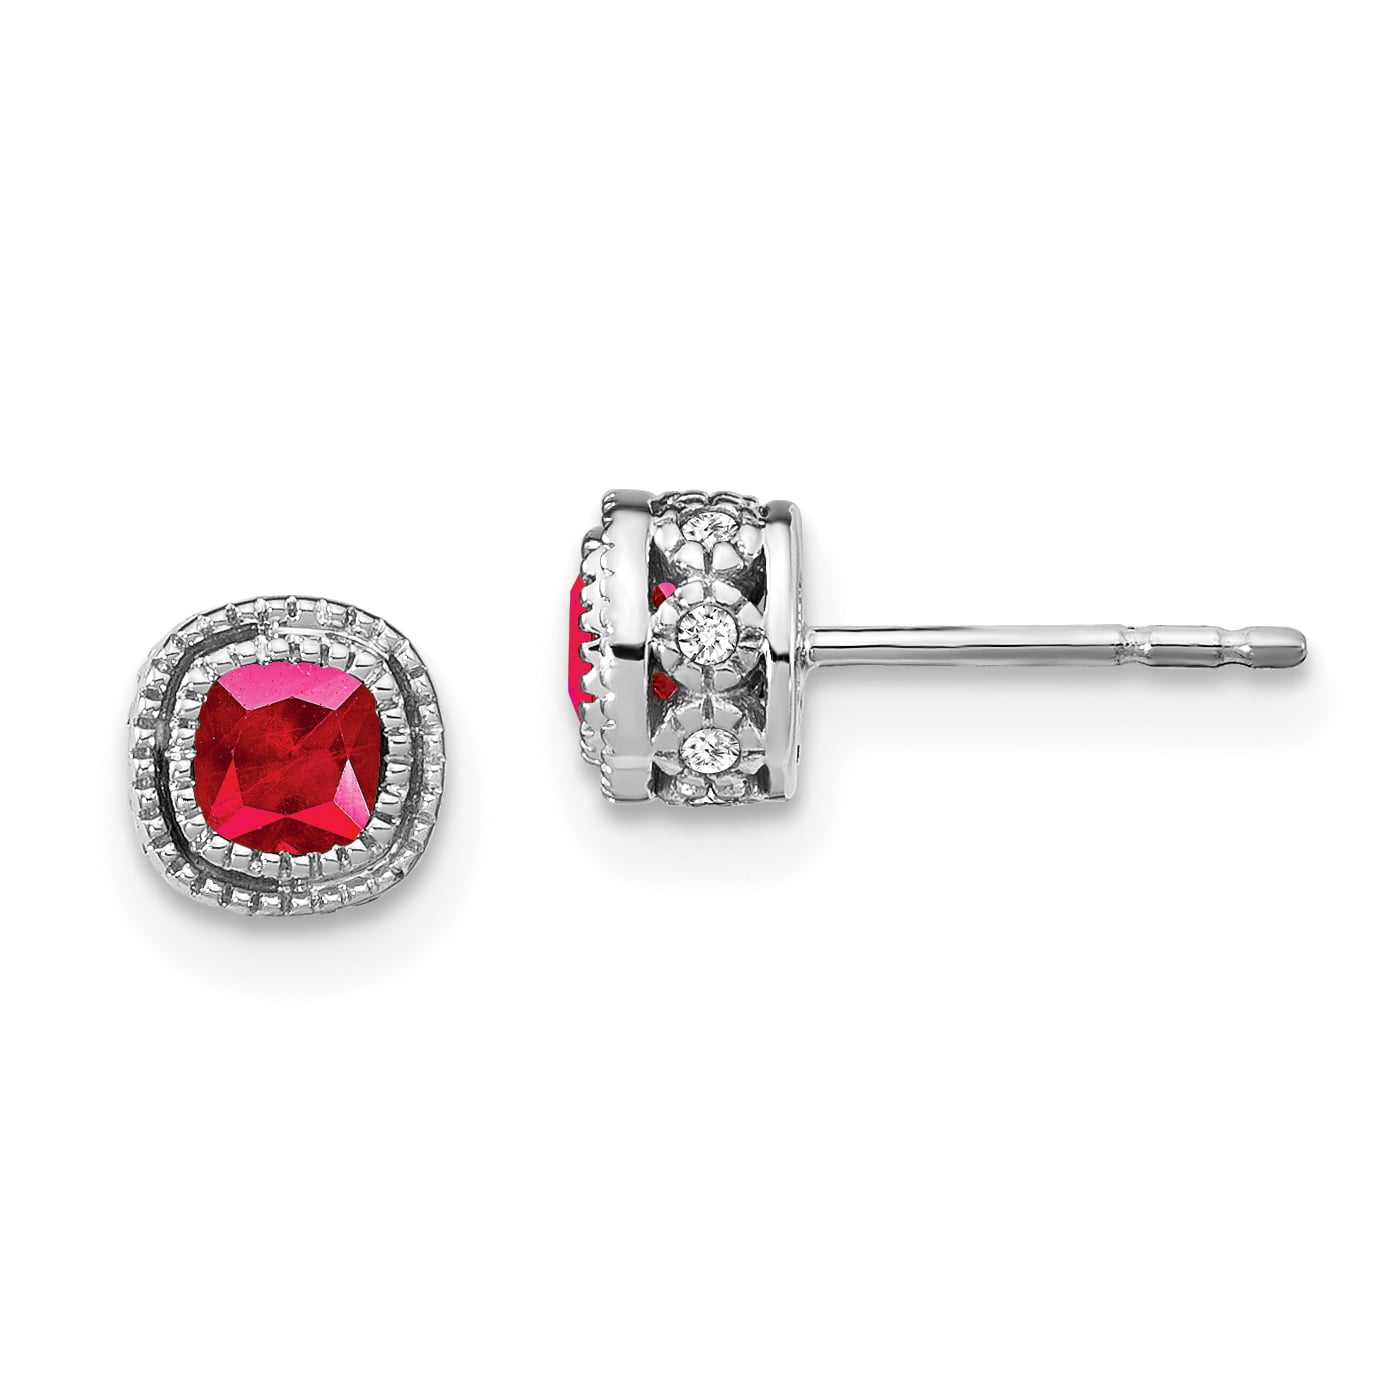 Details about   Synthetic Ruby Gold Finish CZ Halo Earrings Unisex 